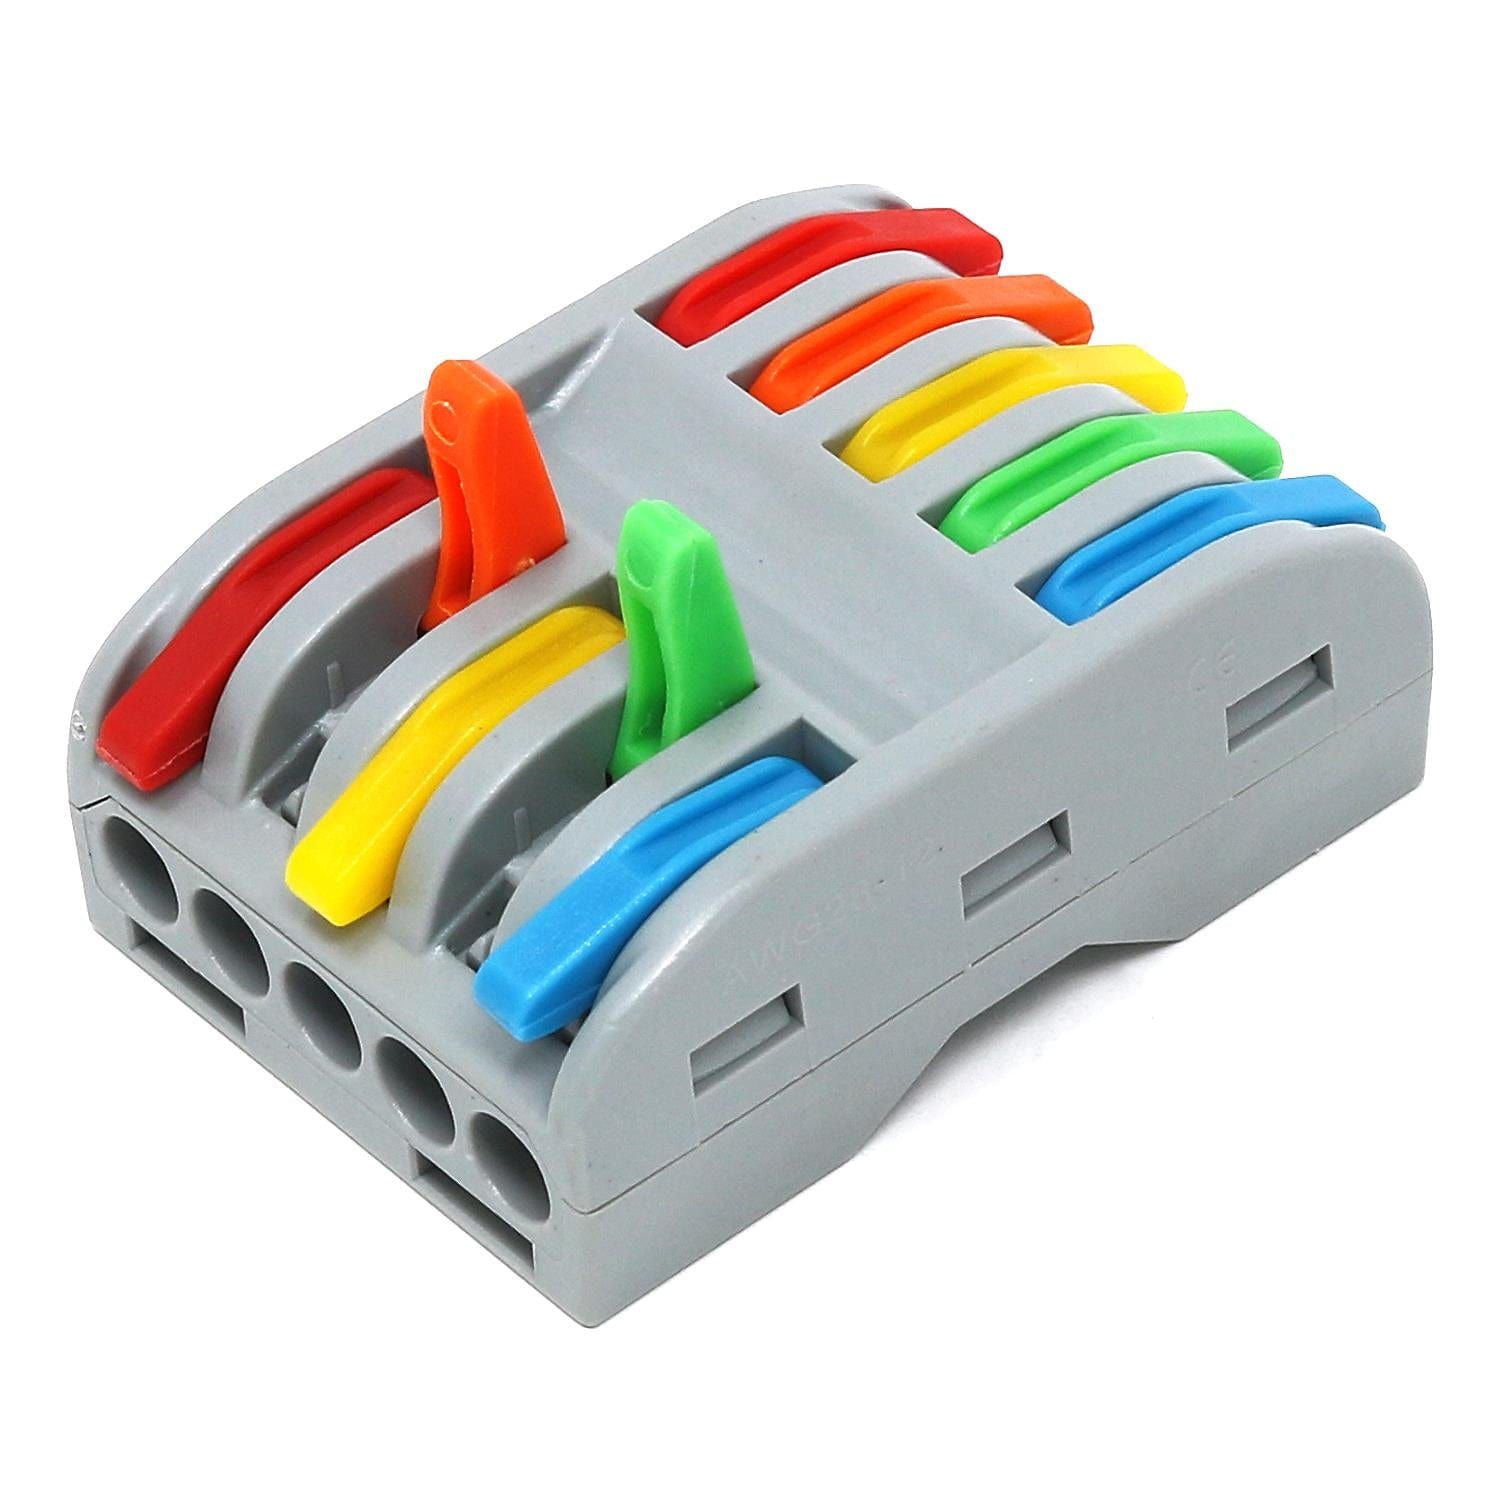 5-Way Fast Wire Connectors - Pack of 3 - The Pi Hut